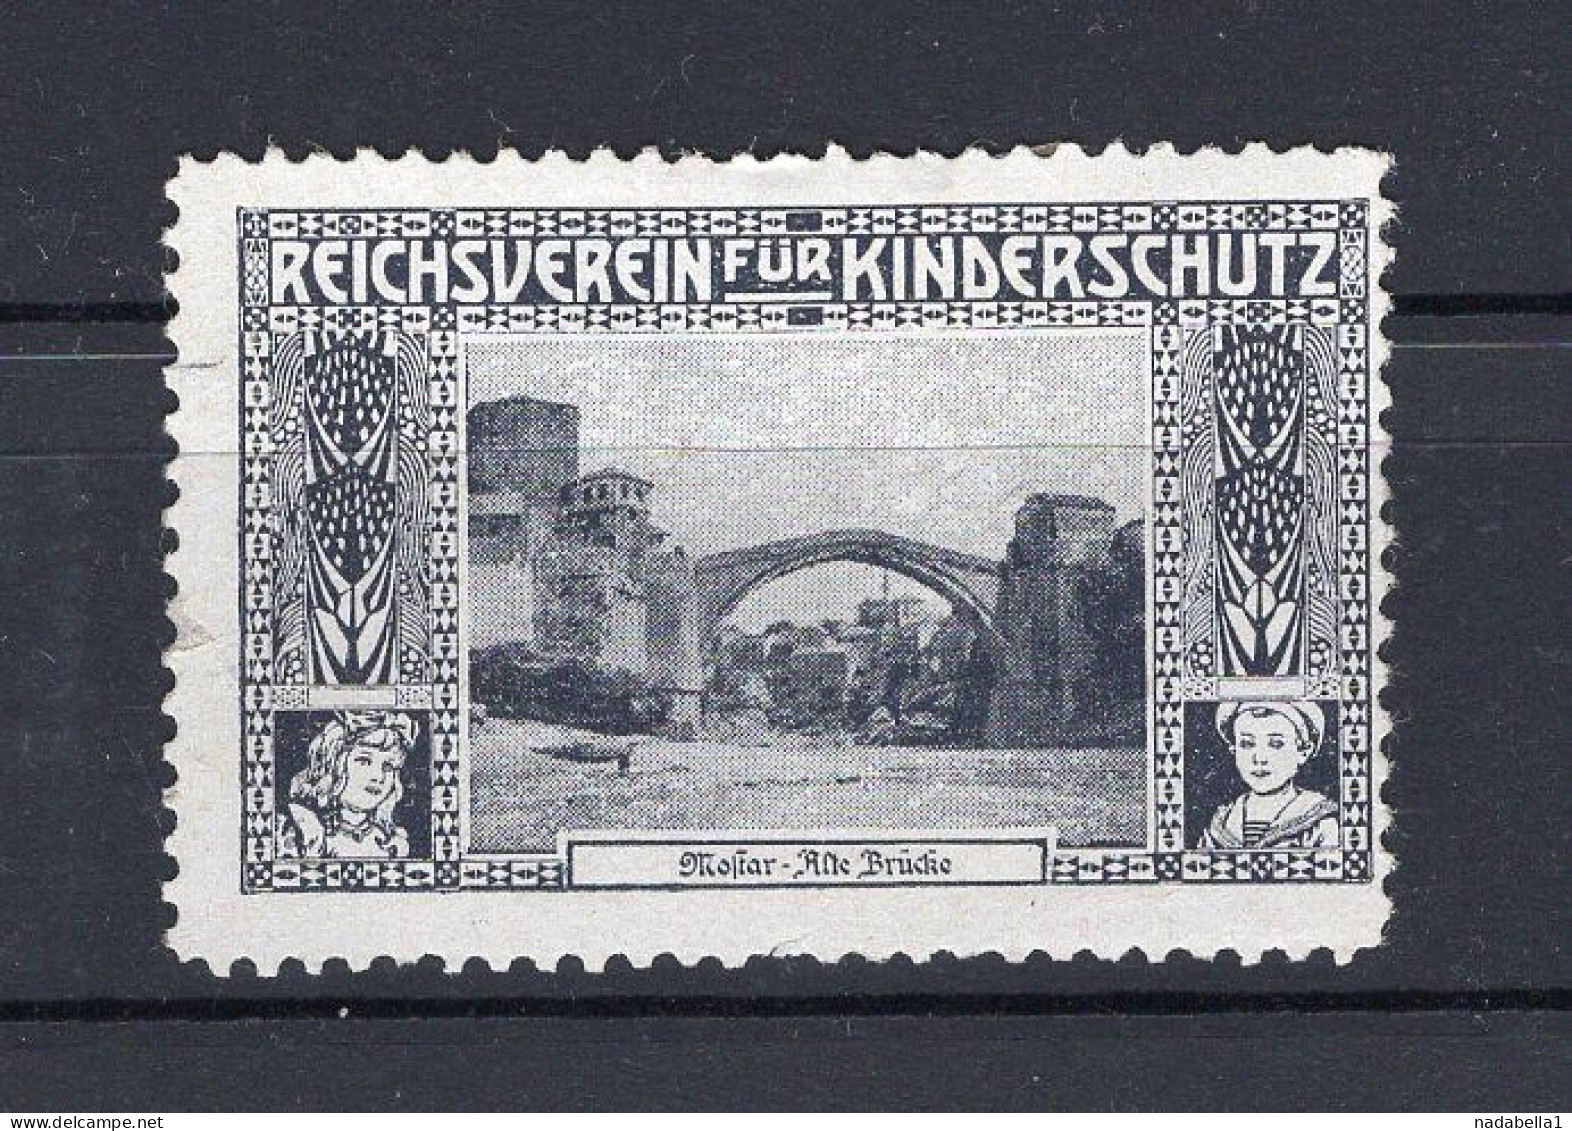 1900? AUSTRIA,HUNGARY EMPIRE,BOSNIA,REICH ASSOCIATION FOR CHILD PROTECTION ADDITIONAL STAMP,MOSTAR OLD BRIDGE - Unused Stamps